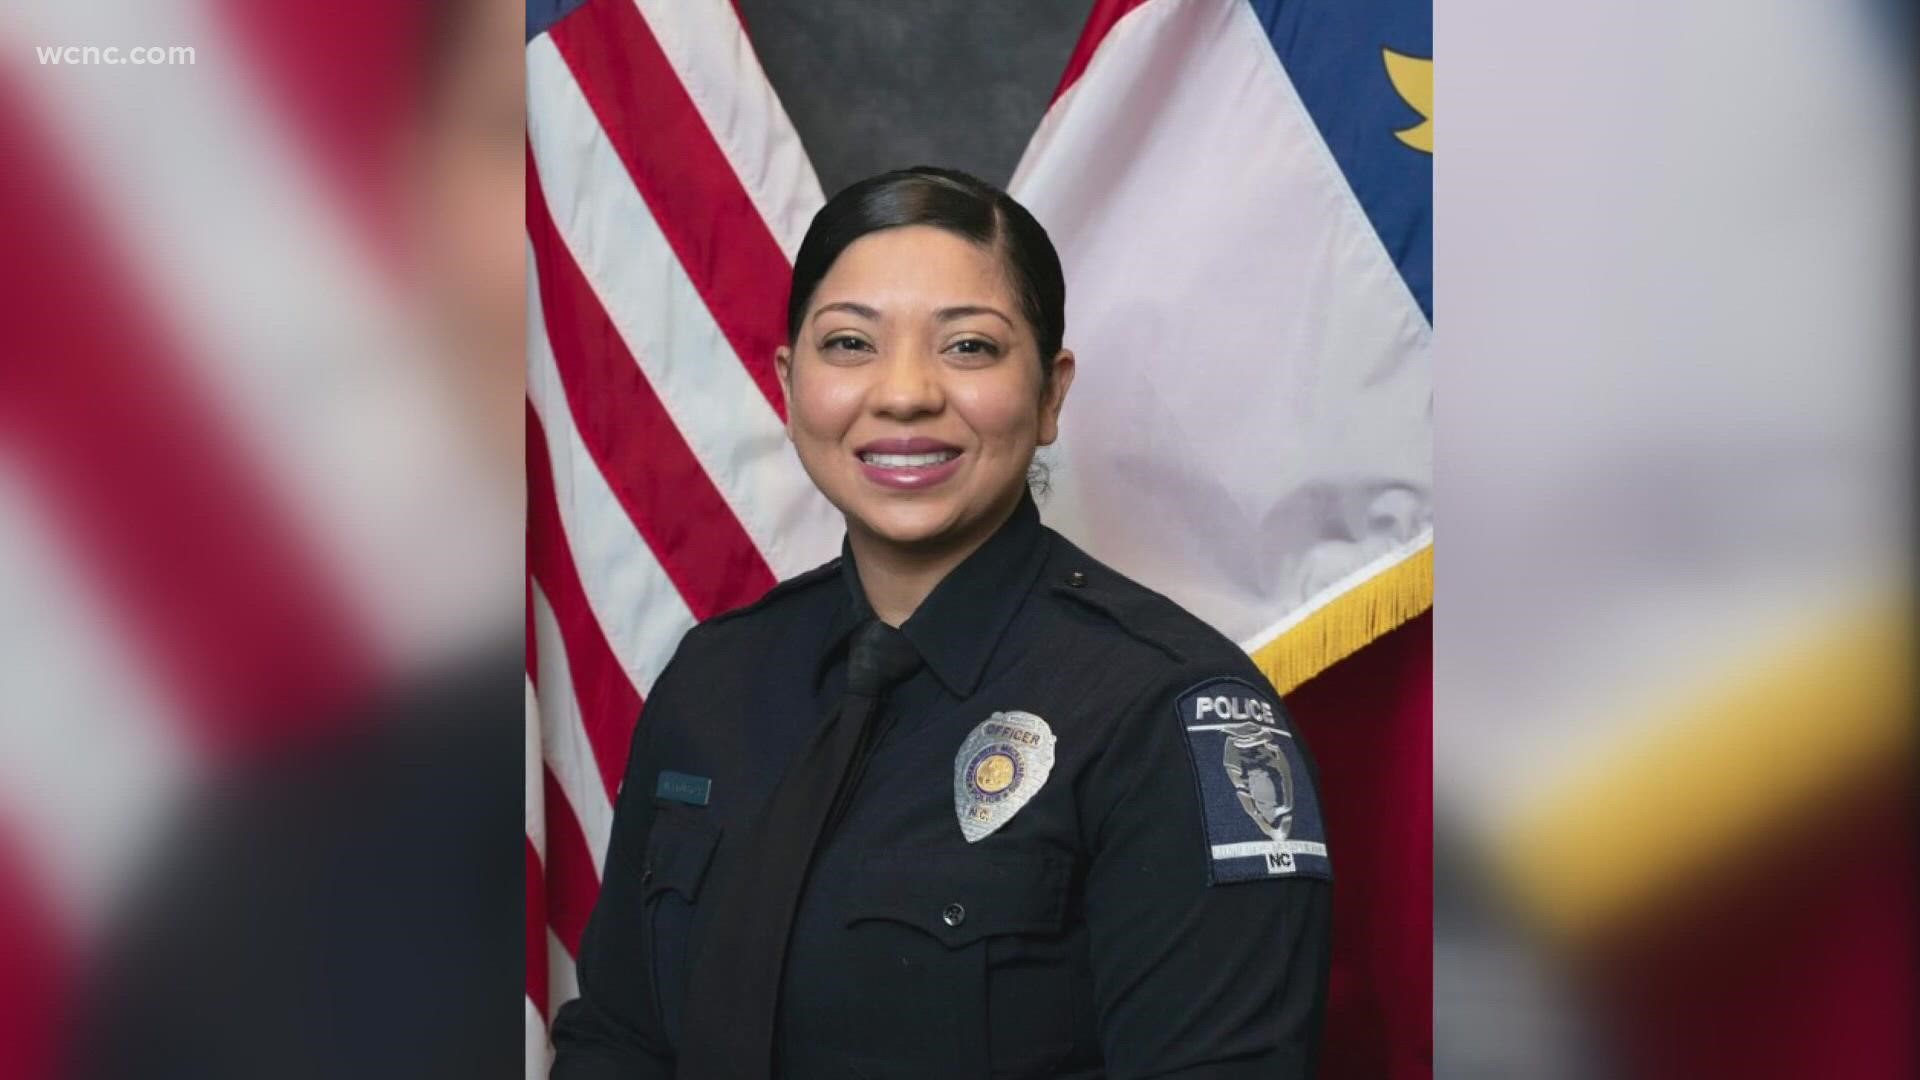 WCNC Charlotte closes our 6 p.m. newscast with one final reflection on Ofc. Mia Goodwin's service and life.